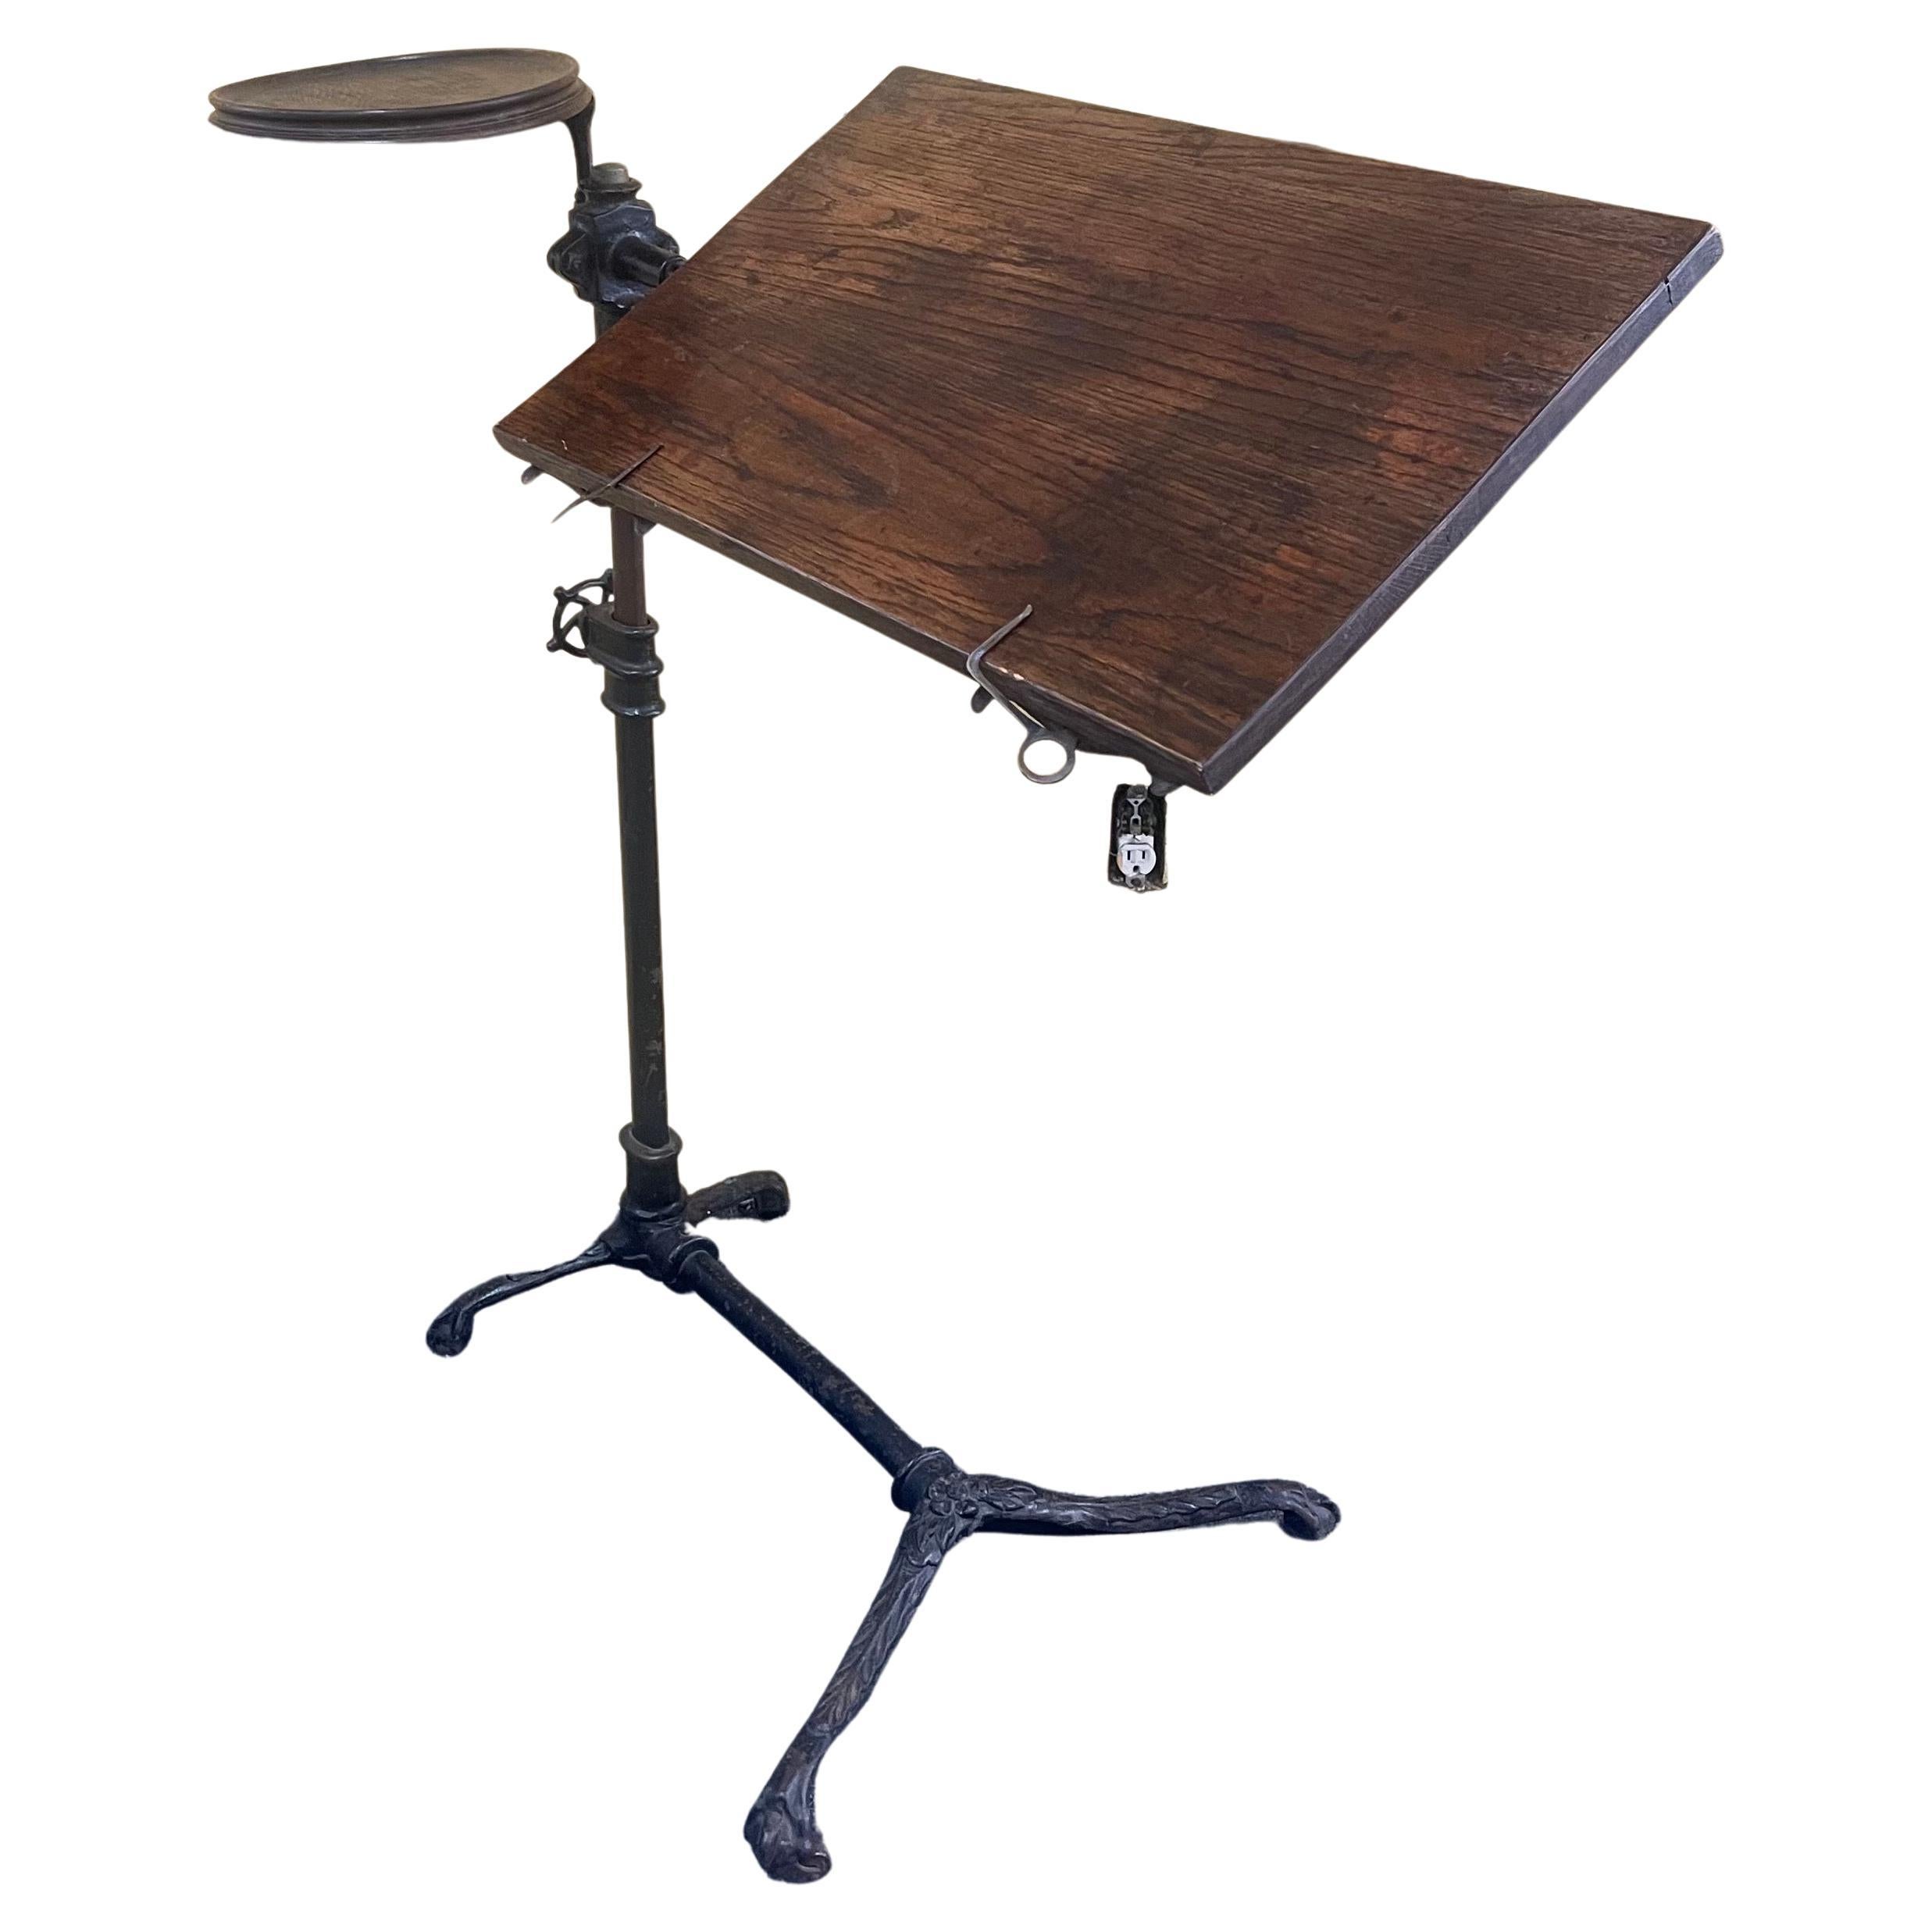 American Victorian Industrial Cast Iron Drafting Table or Desk by J. Foot & Son of London